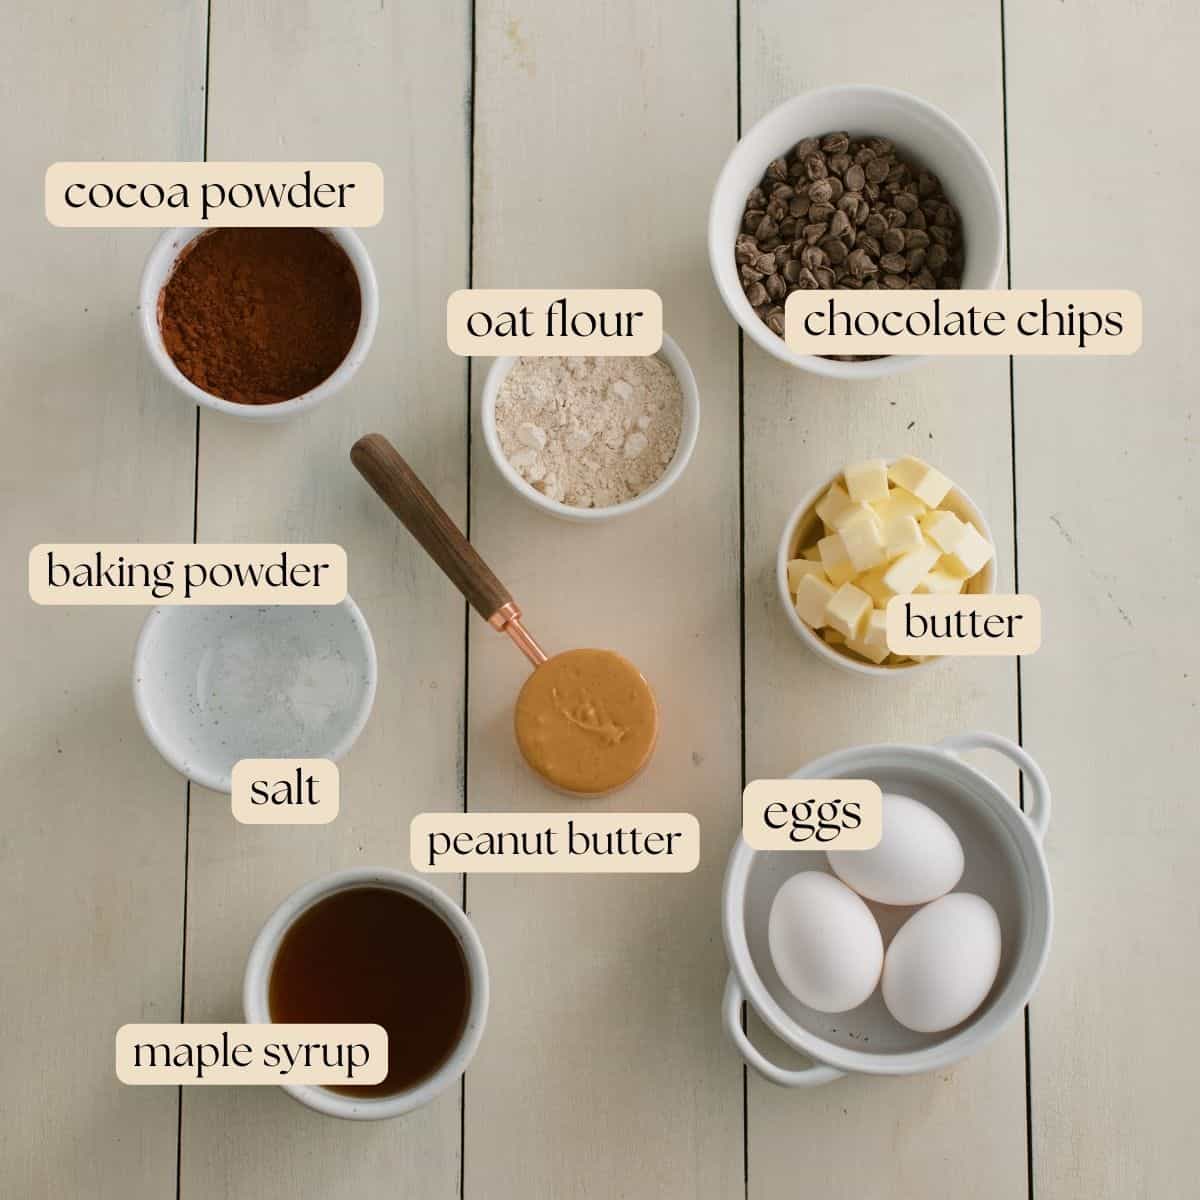 The 9 ingredients required to make oat flour brownies.